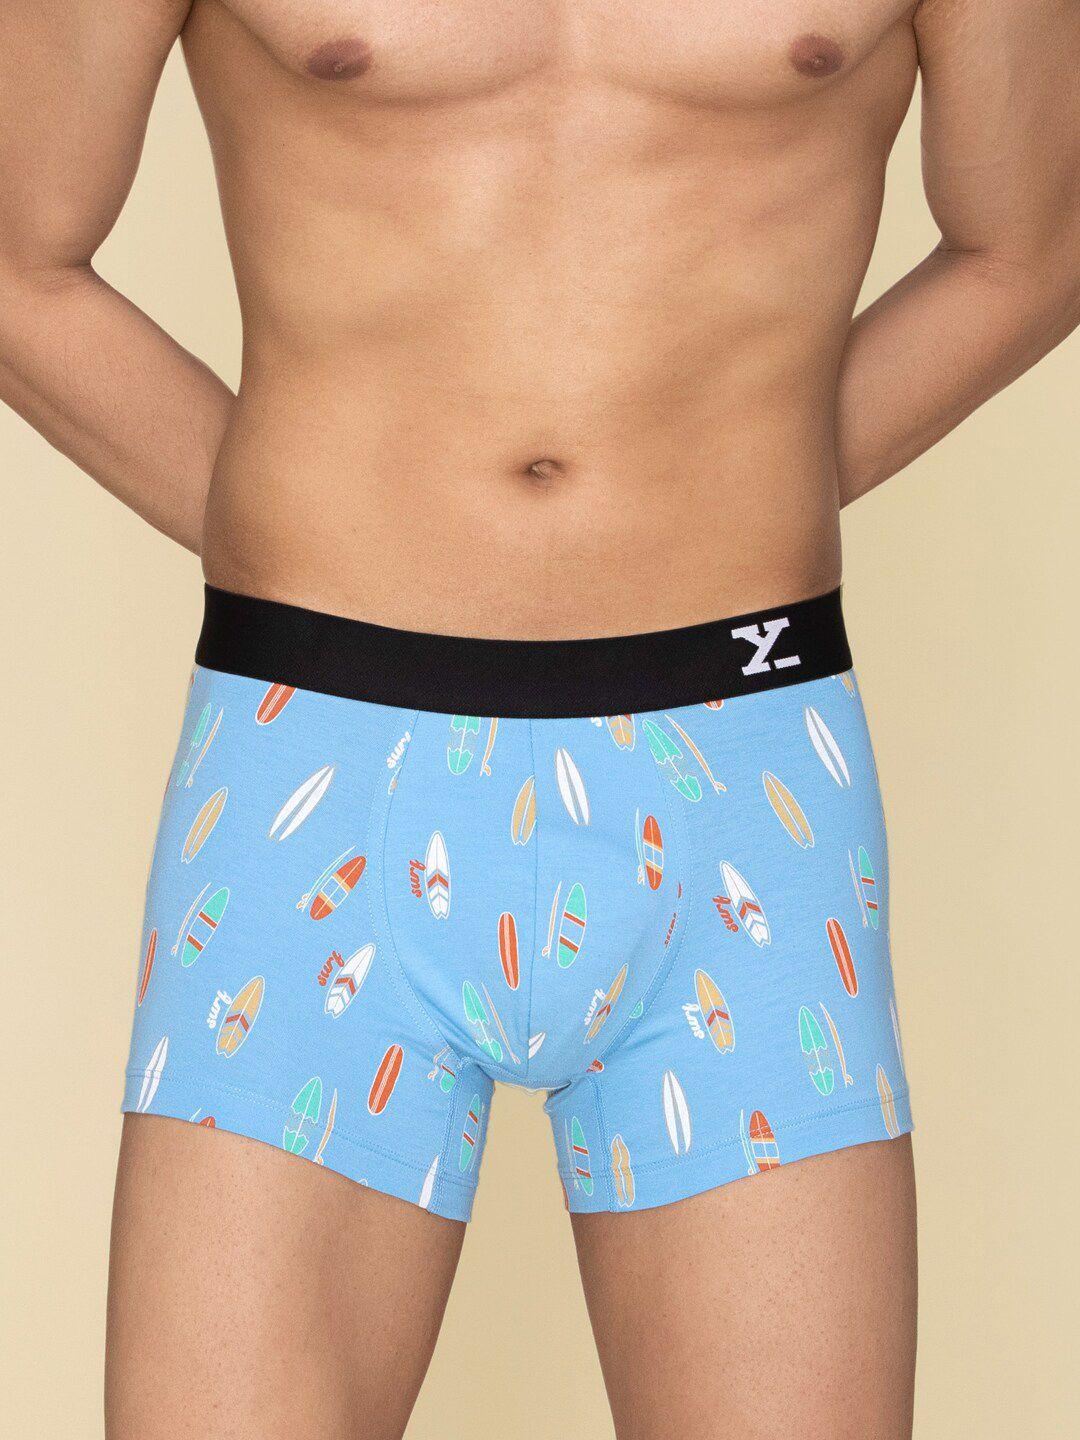 xyxx printed cotton trunk xytrnk203